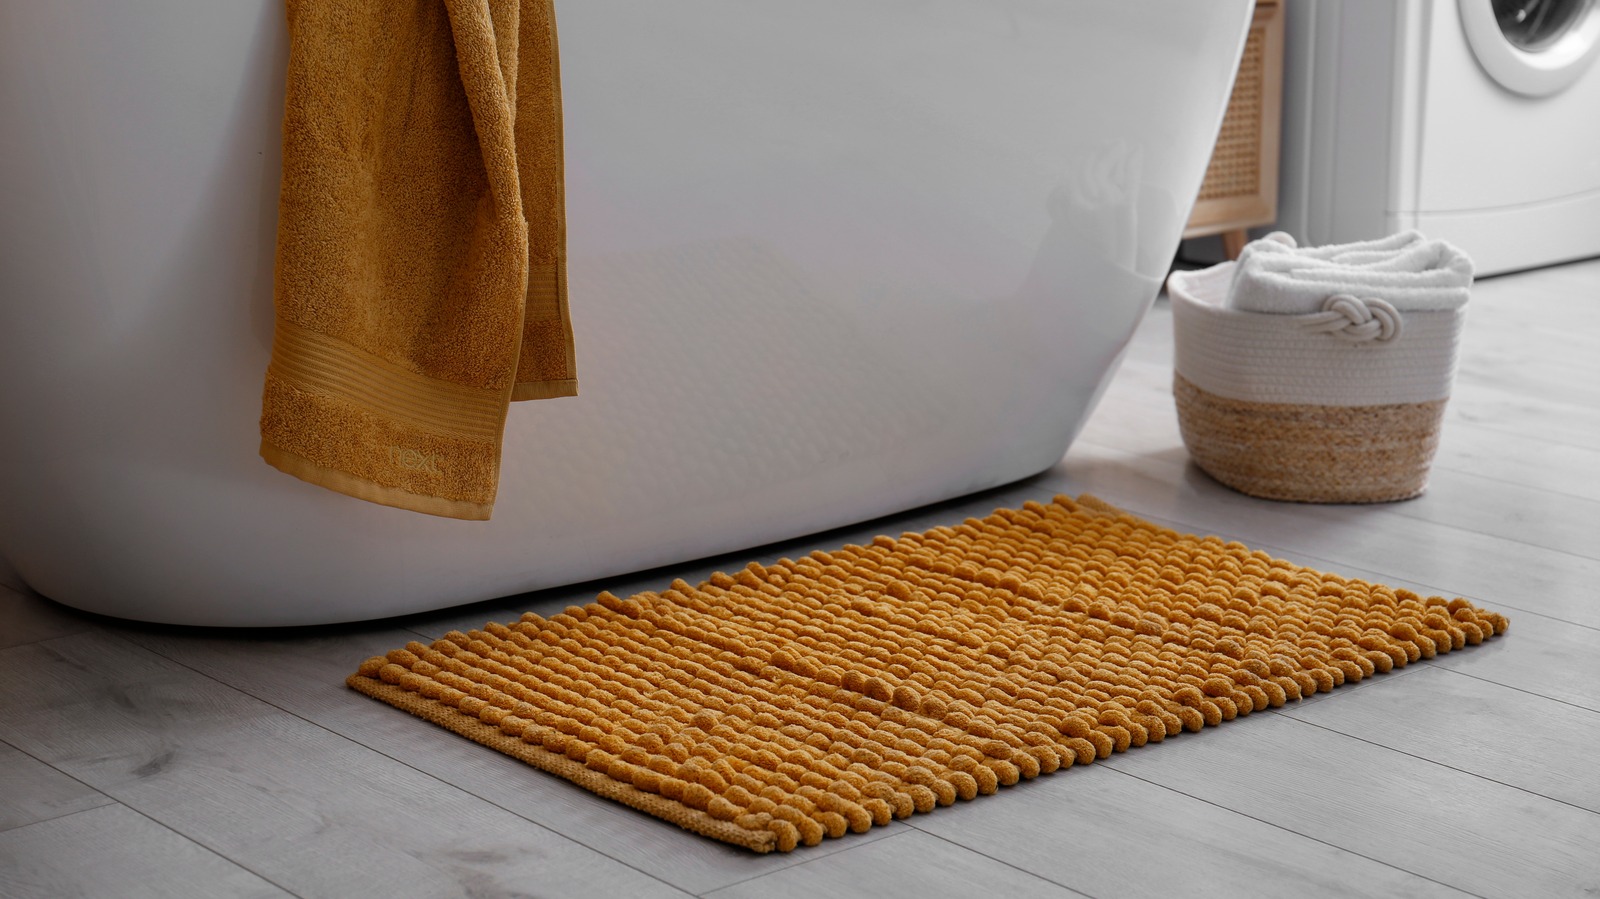 https://www.housedigest.com/img/gallery/use-baking-soda-on-your-bath-mats-for-a-truly-clean-smell/l-intro-1688045285.jpg